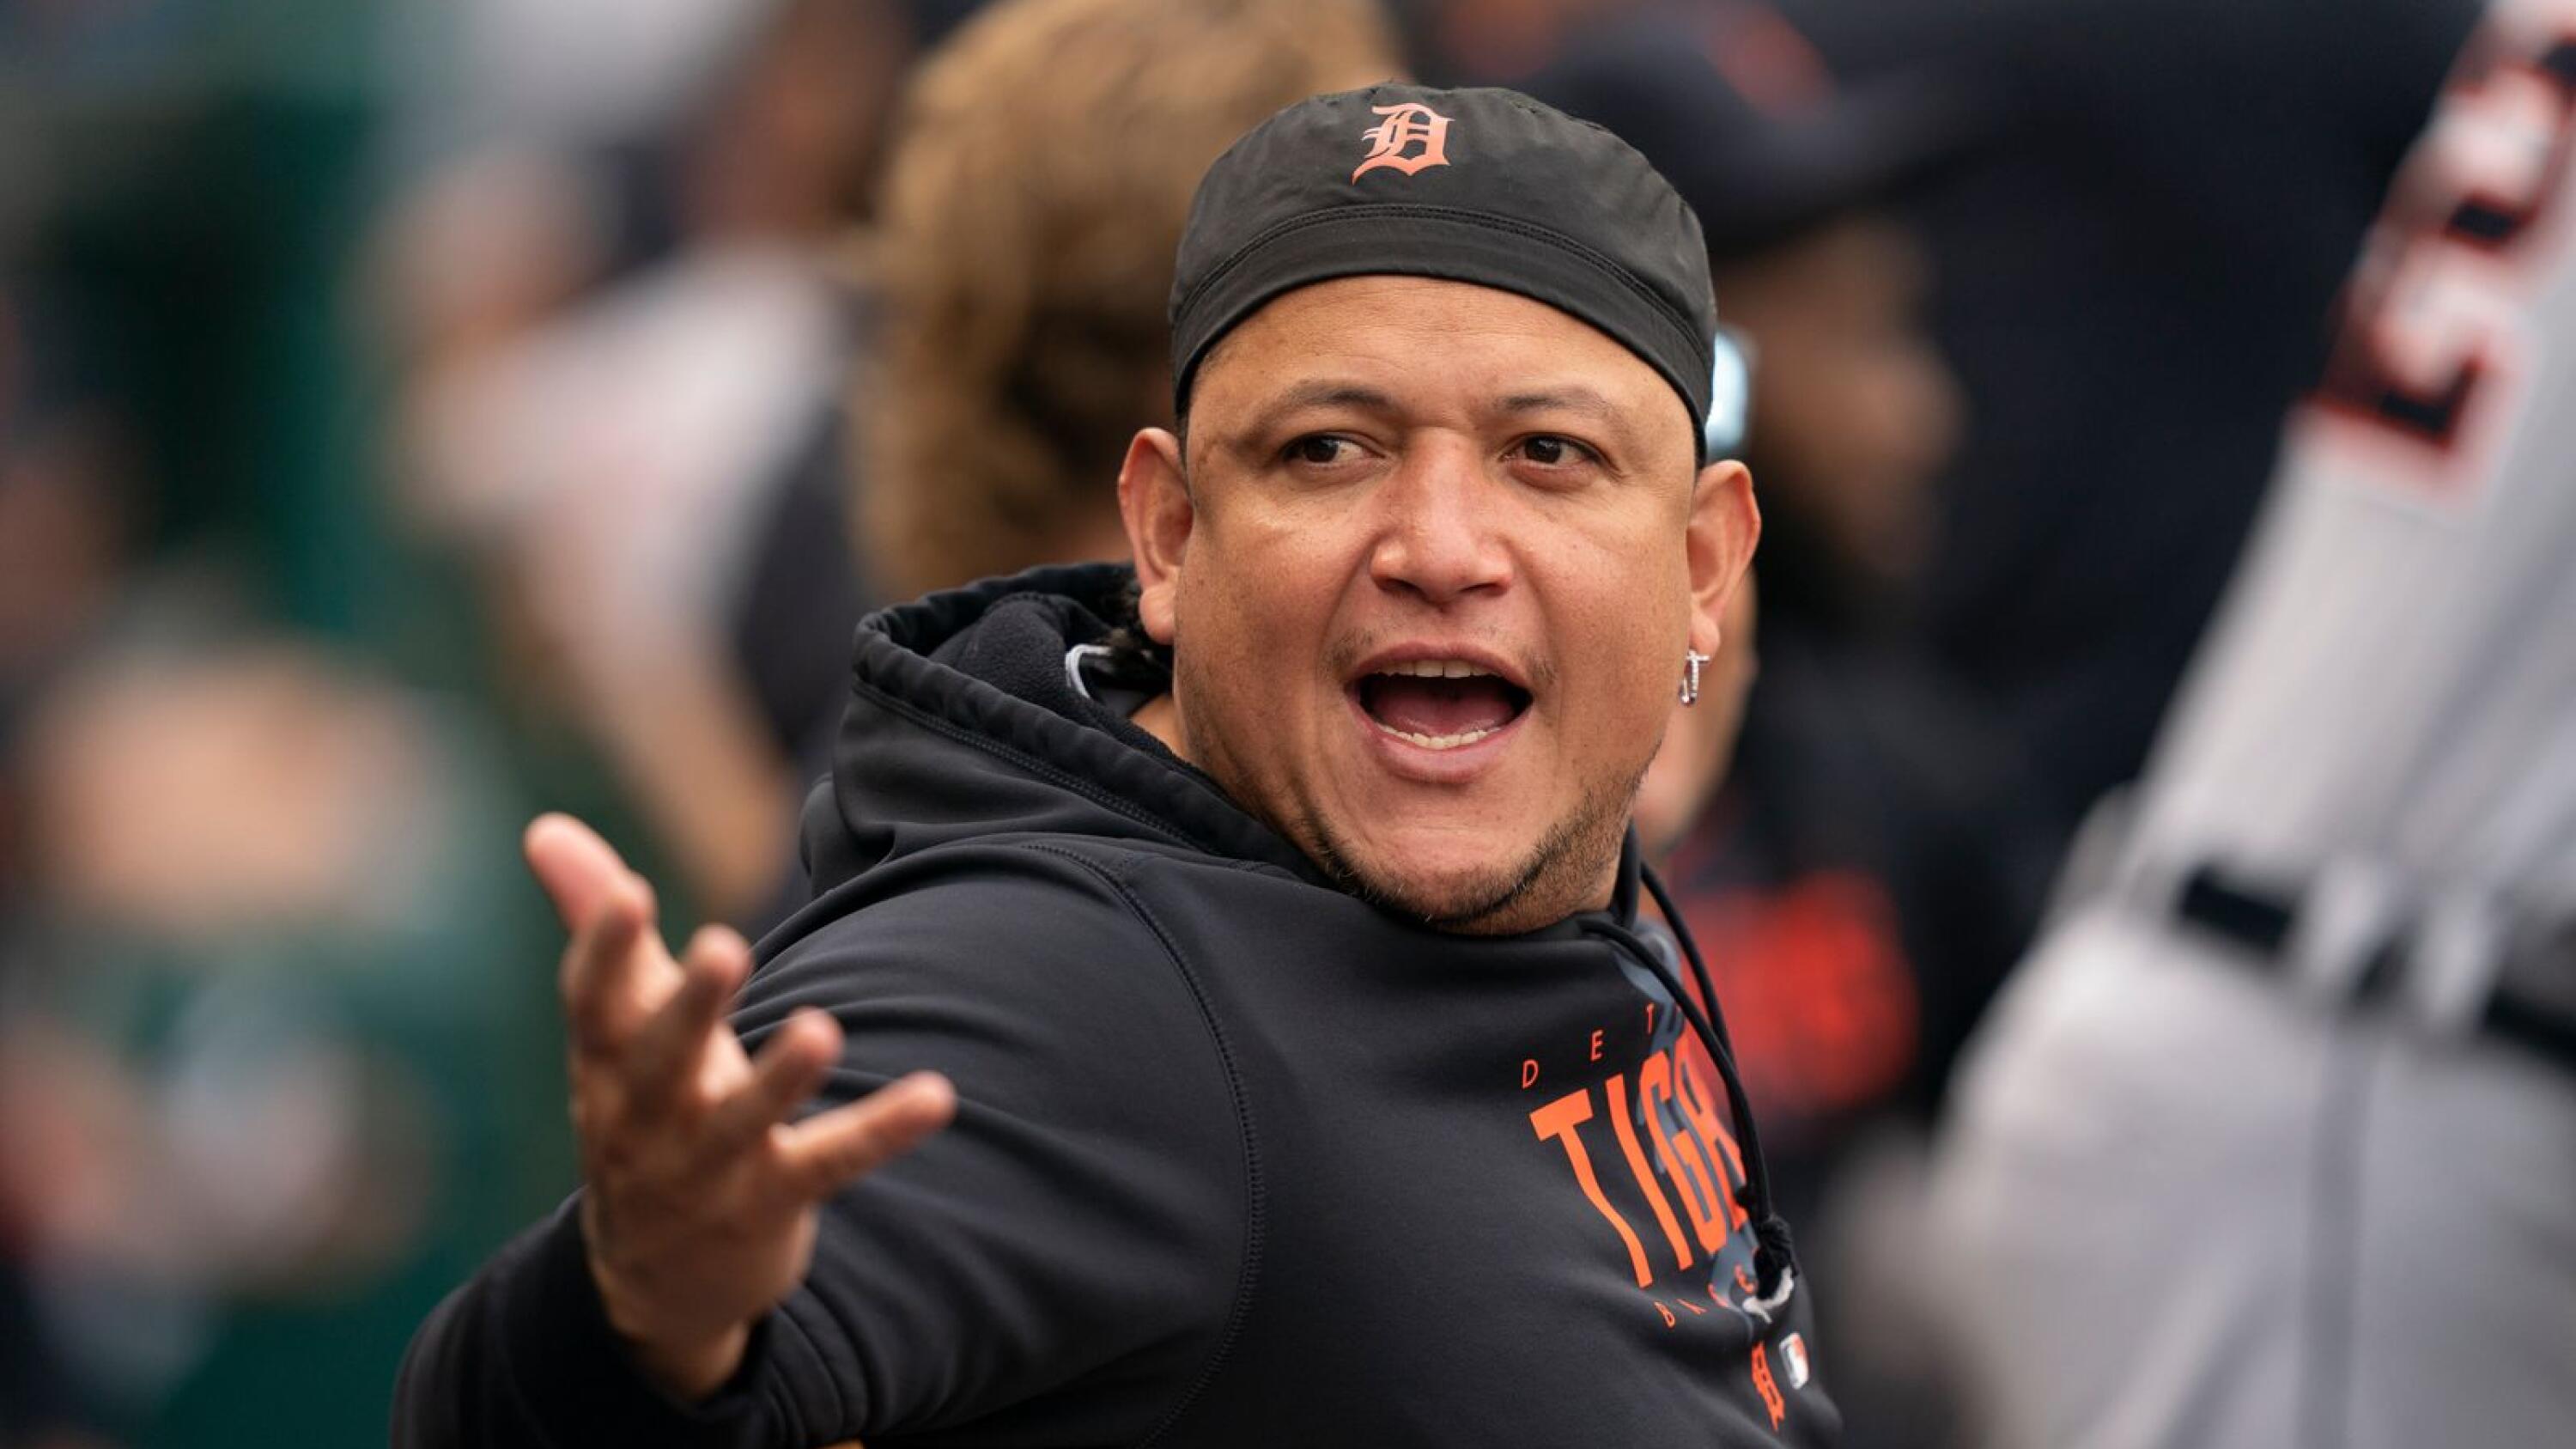 Miguel Cabrera's career coming to close with Guardians in town